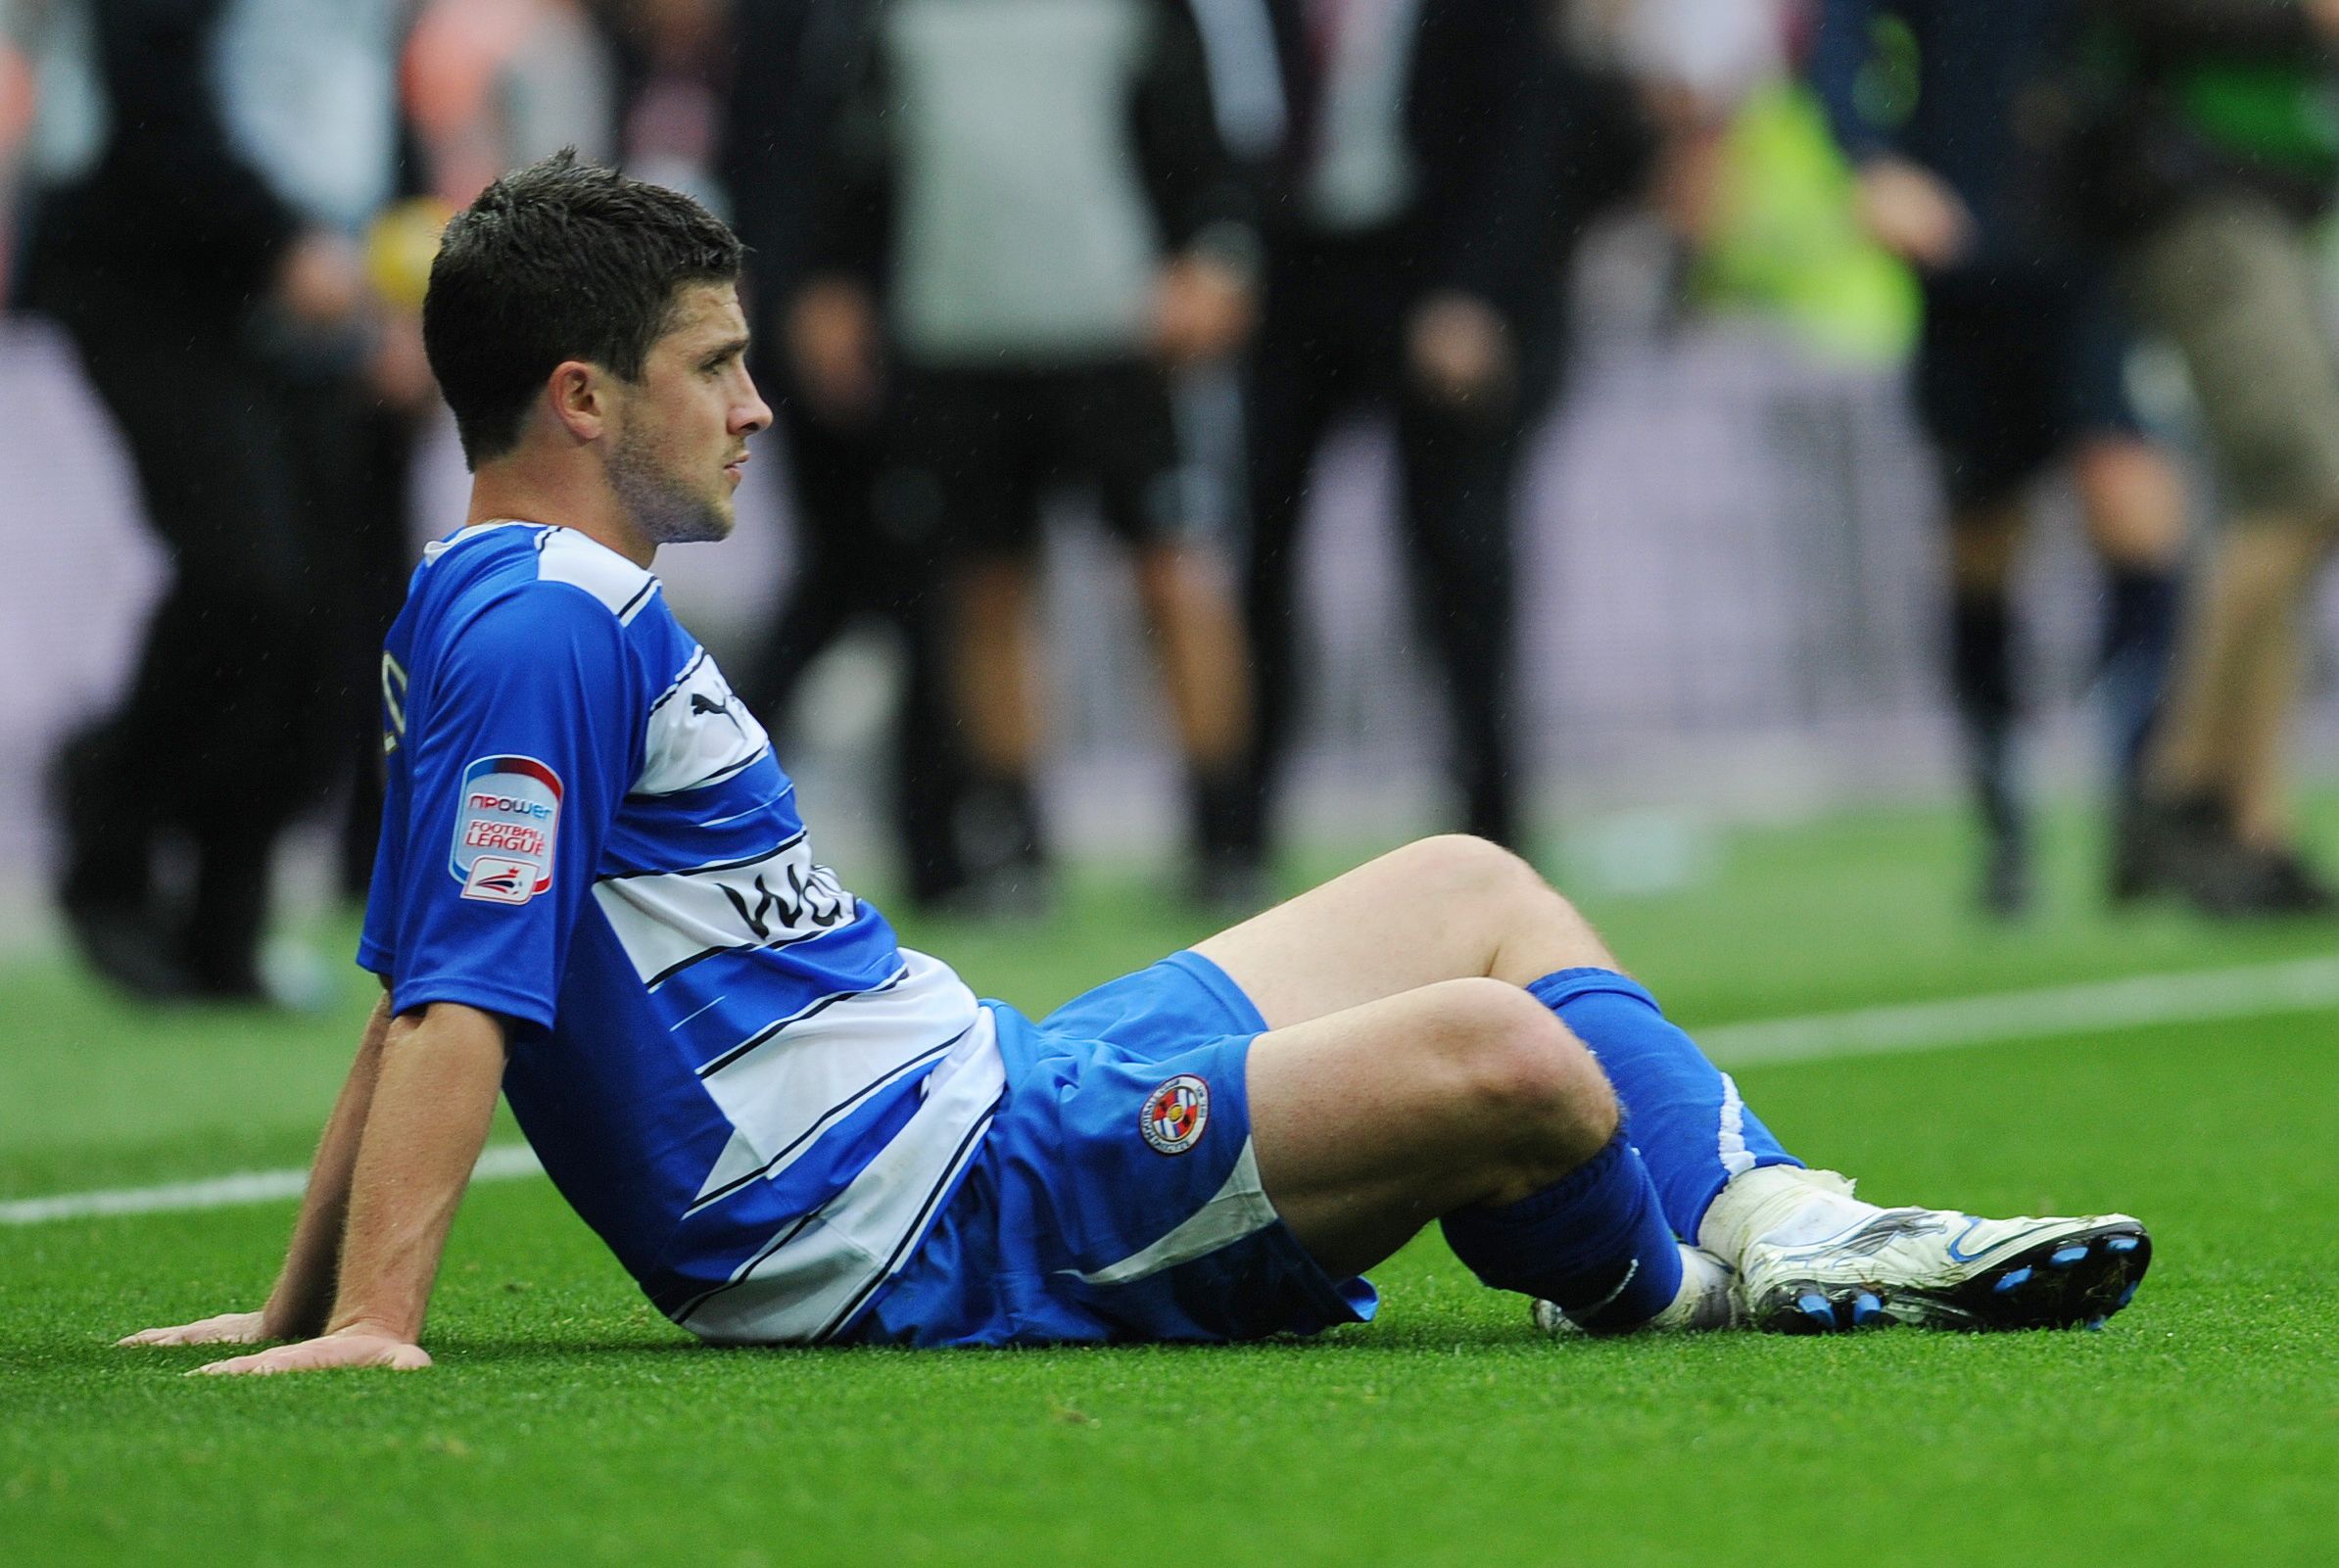 Football - Reading v Swansea City npower Football League Championship Play-Off Final  - Wembley Stadium - 10/11 - 30/5/11 
Reading's Shane Long looks dejected at the end of the match 
Mandatory Credit: Action Images / Tony O'Brien 
Livepic